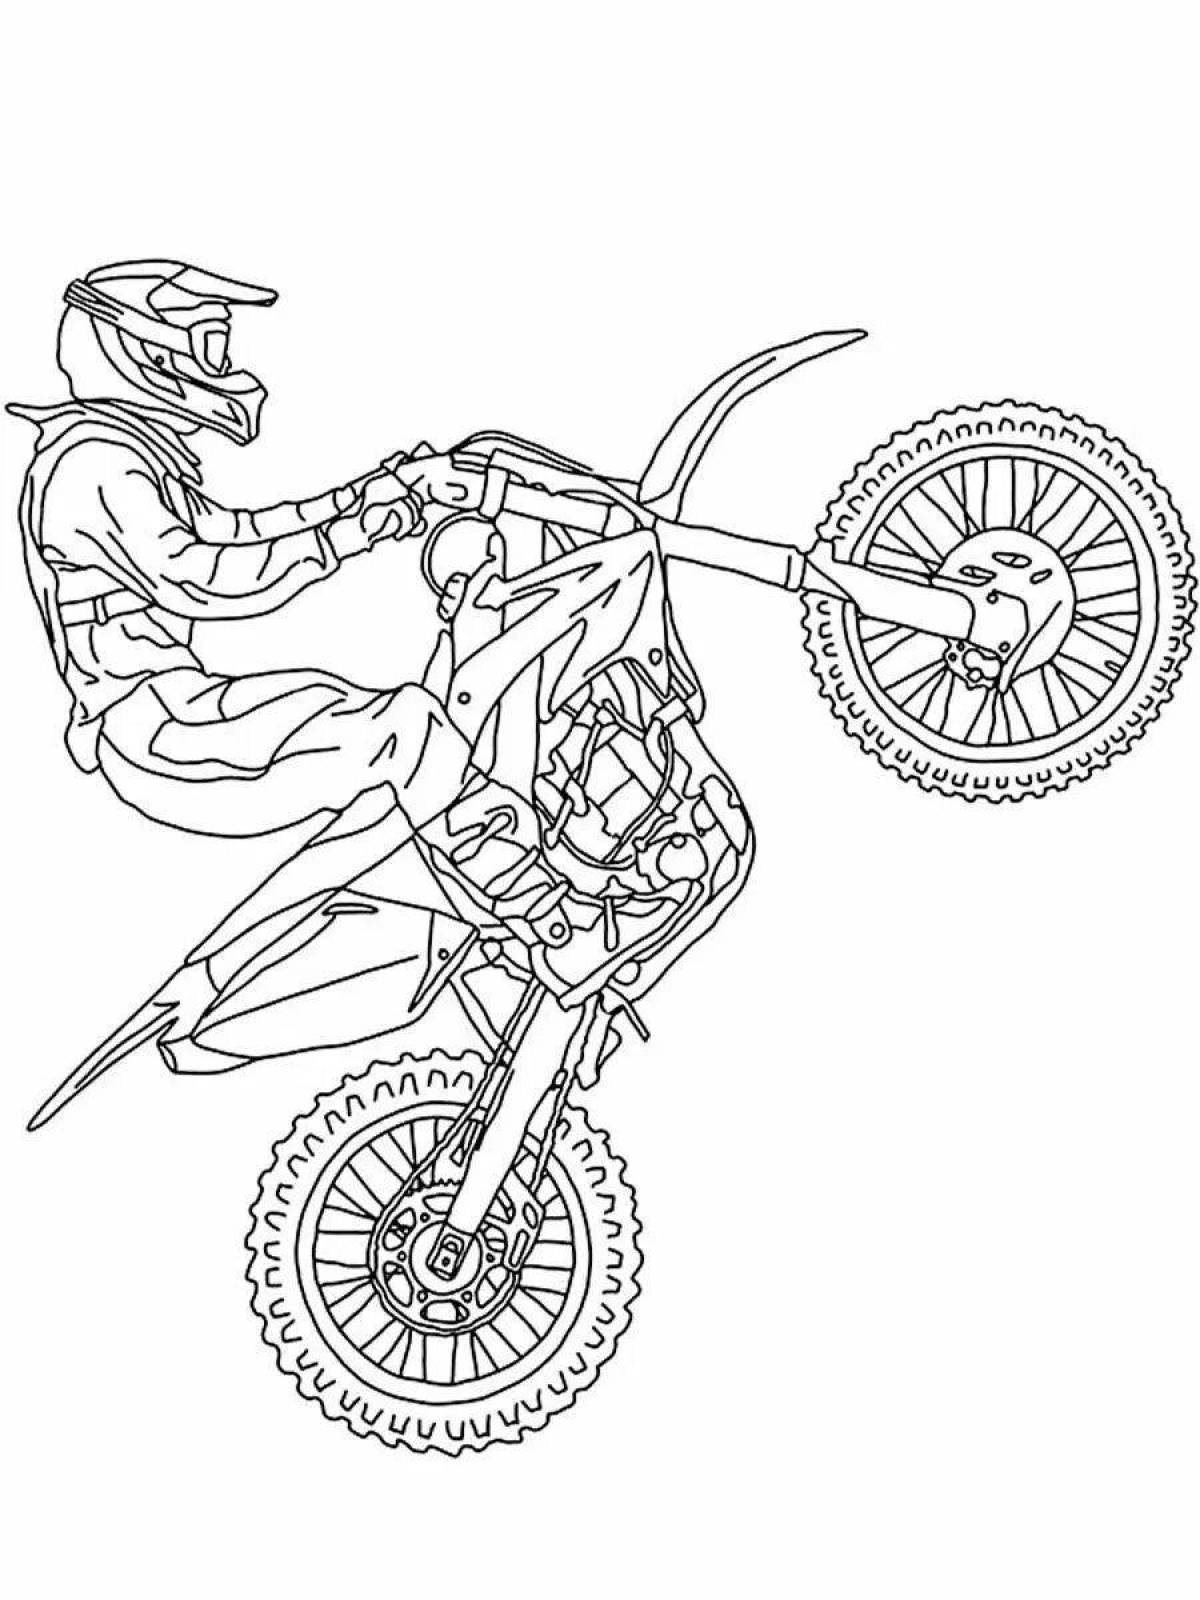 Radiant pit bike coloring page